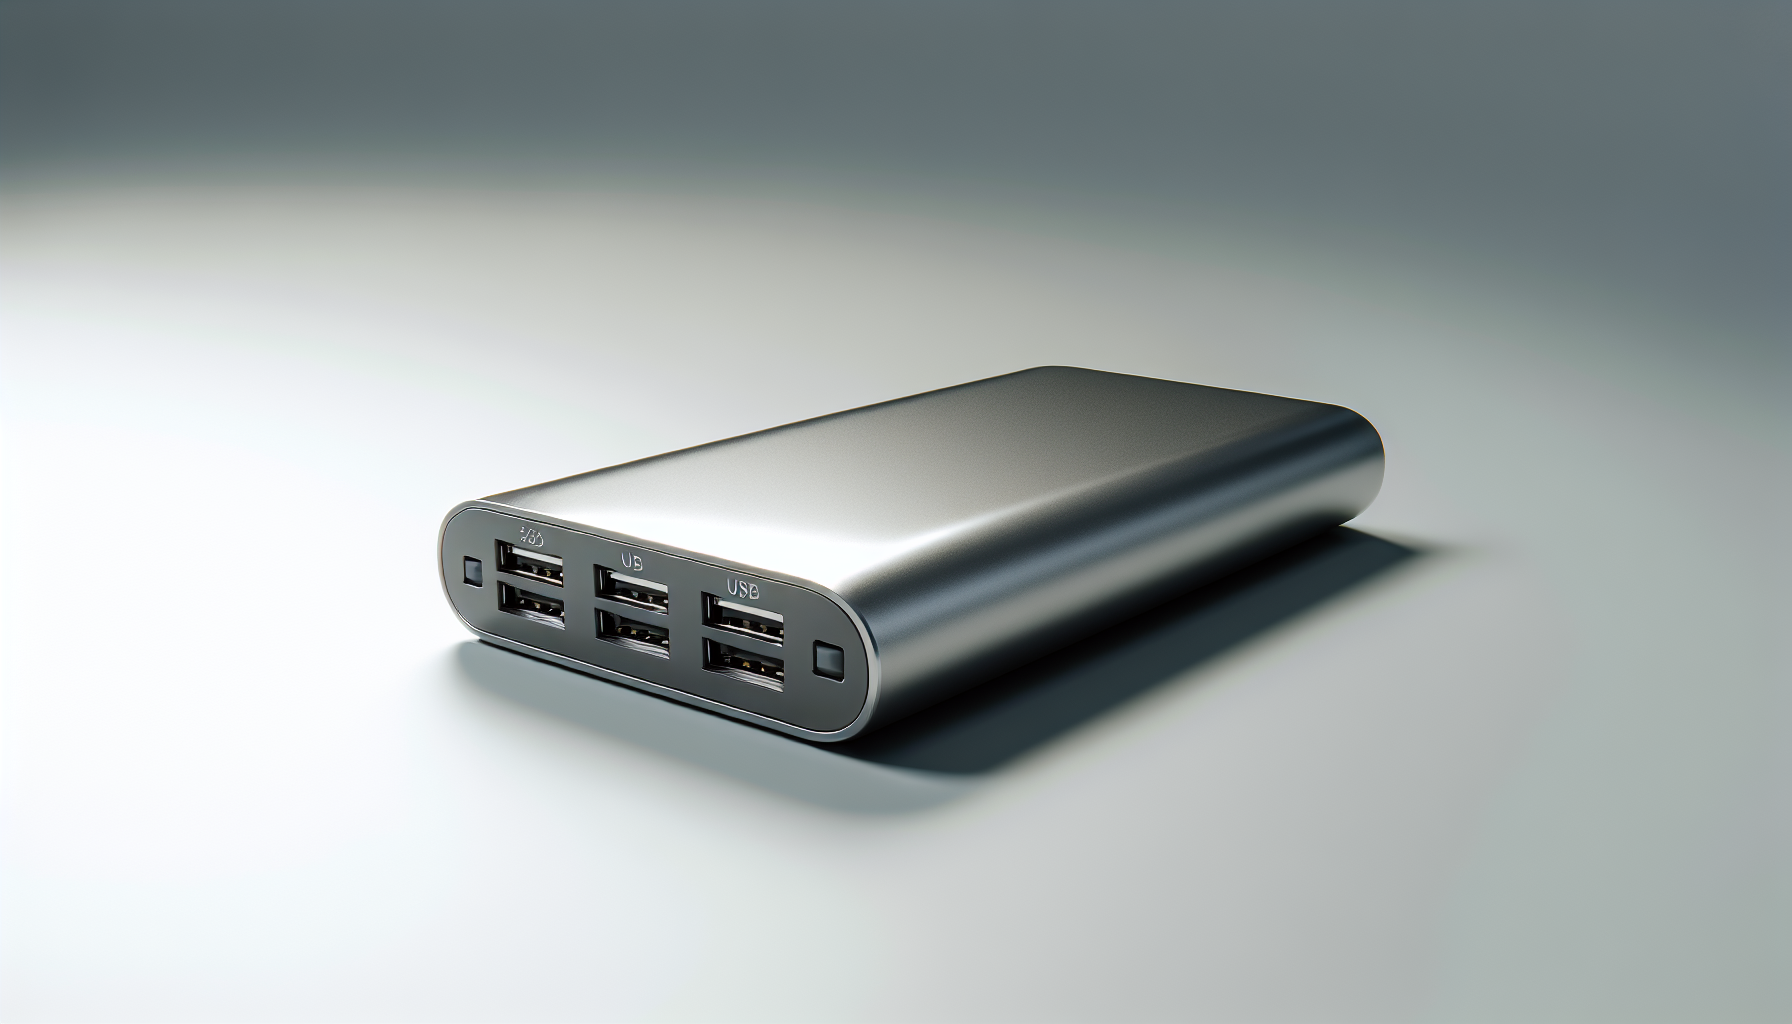 Multiple USB ports of a power bank